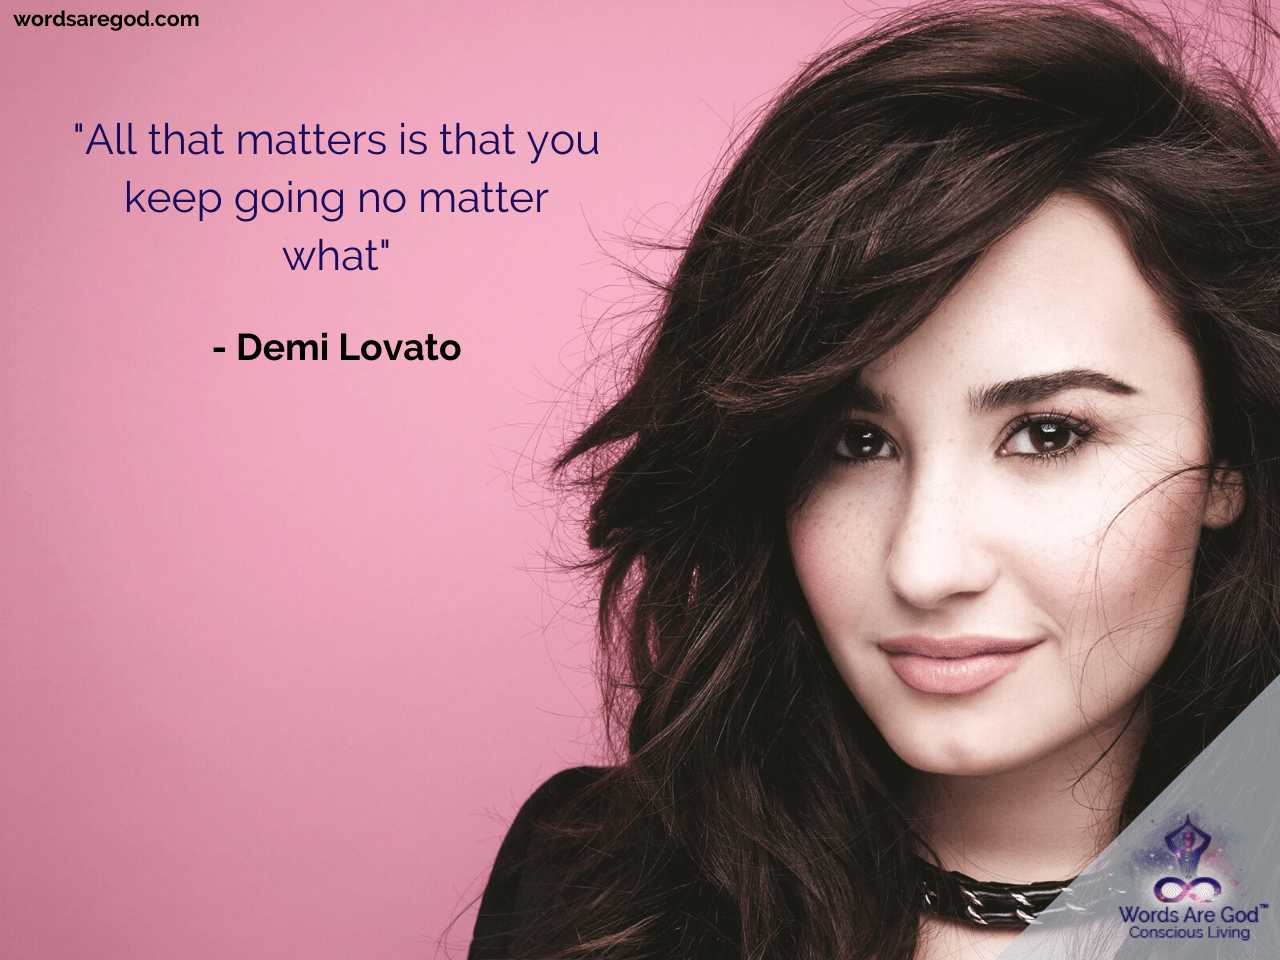 Demi Lovato Quotes Wallpapers